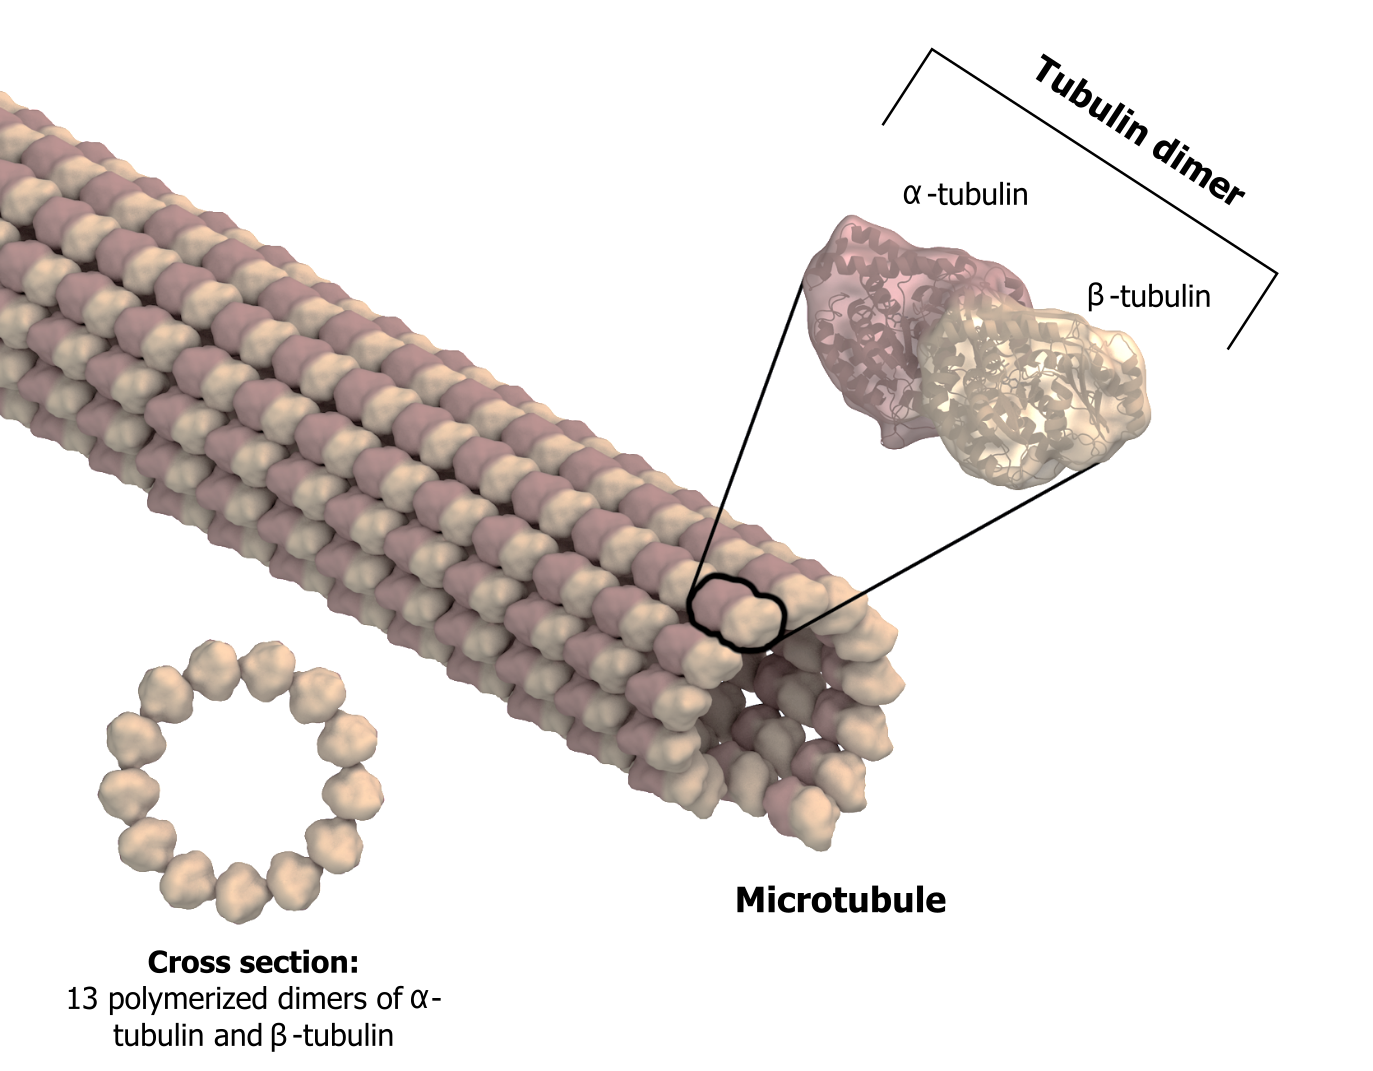 Microtubules, described in figure 18.1, are composed of α-tubulin and β-tubulin tubulin dimers. The cross section shows a circle composed of 13 polymerized dimers of α-tubulin and β-tubulin.